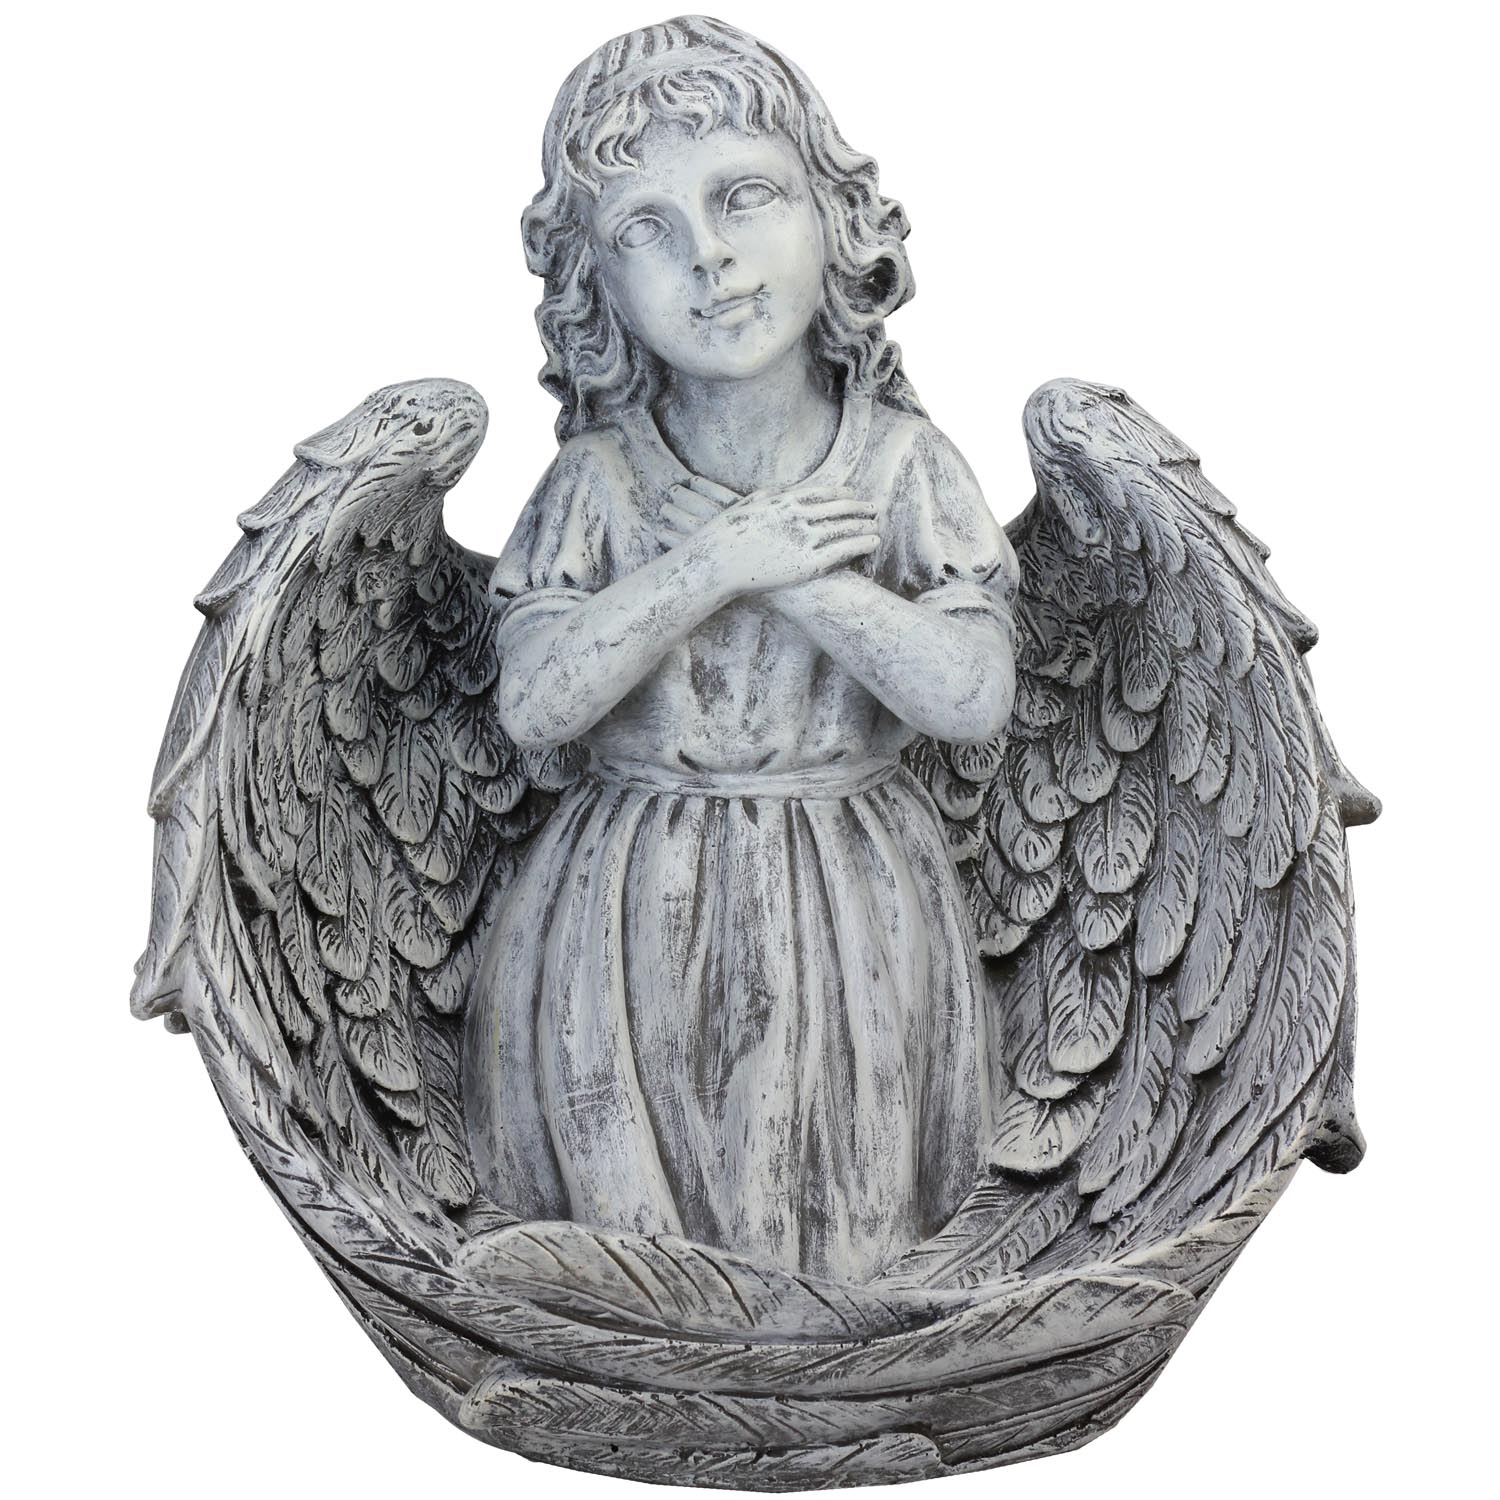 Northlight 16" Cherub Angel Wrapped in Wings Religious Outdoor Patio Garden Statue - Gray - image 1 of 6